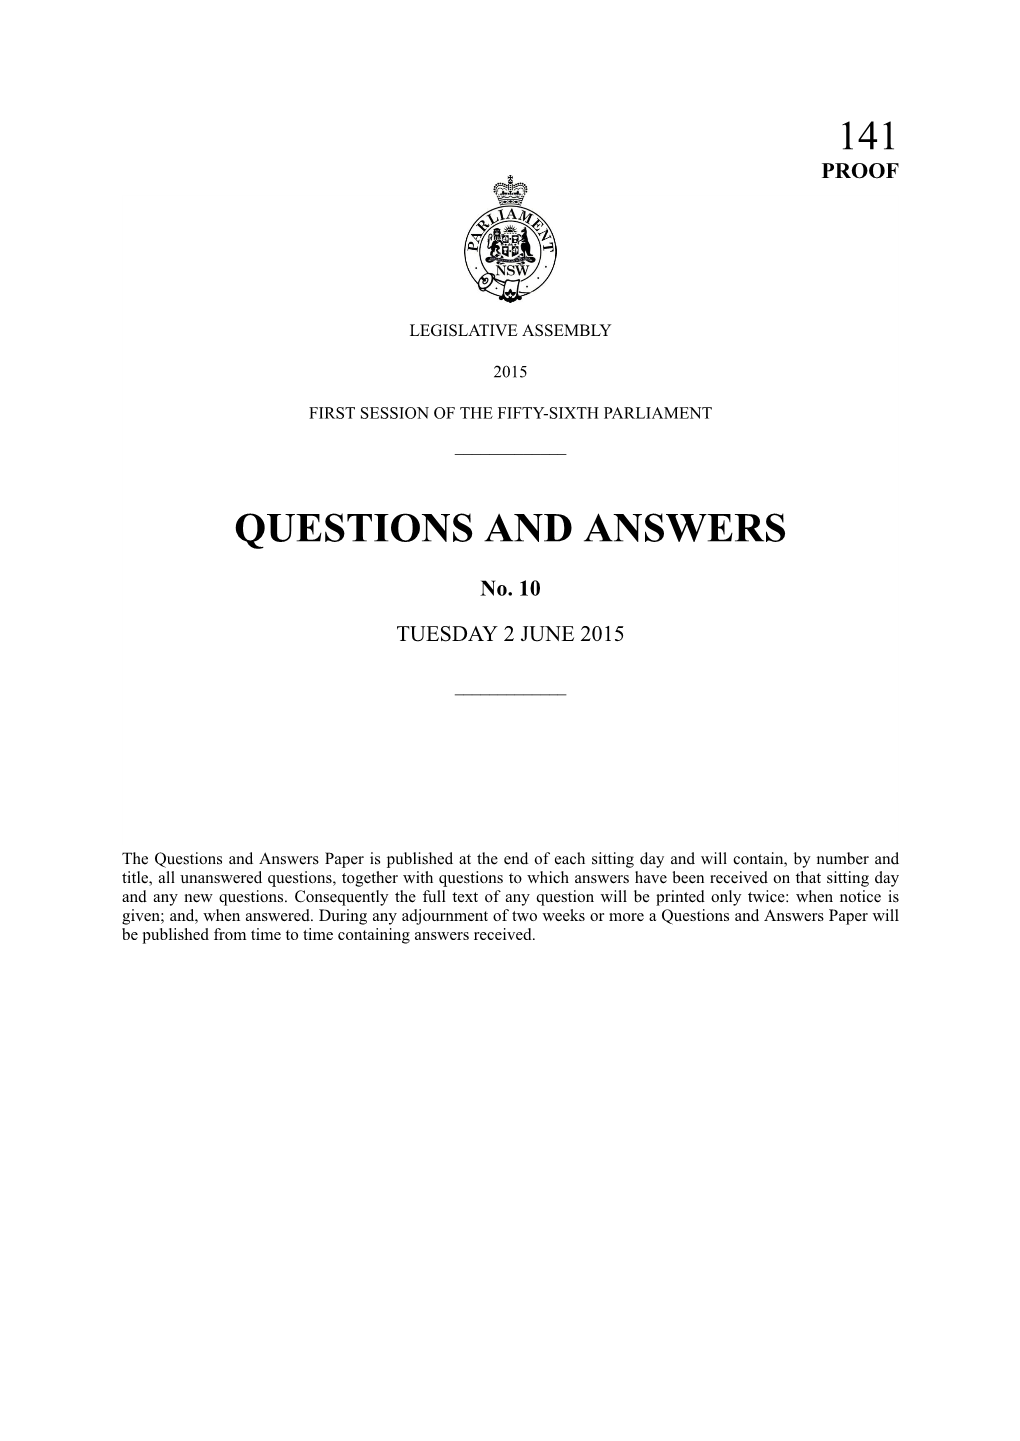 Questions & Answers Paper No. 10